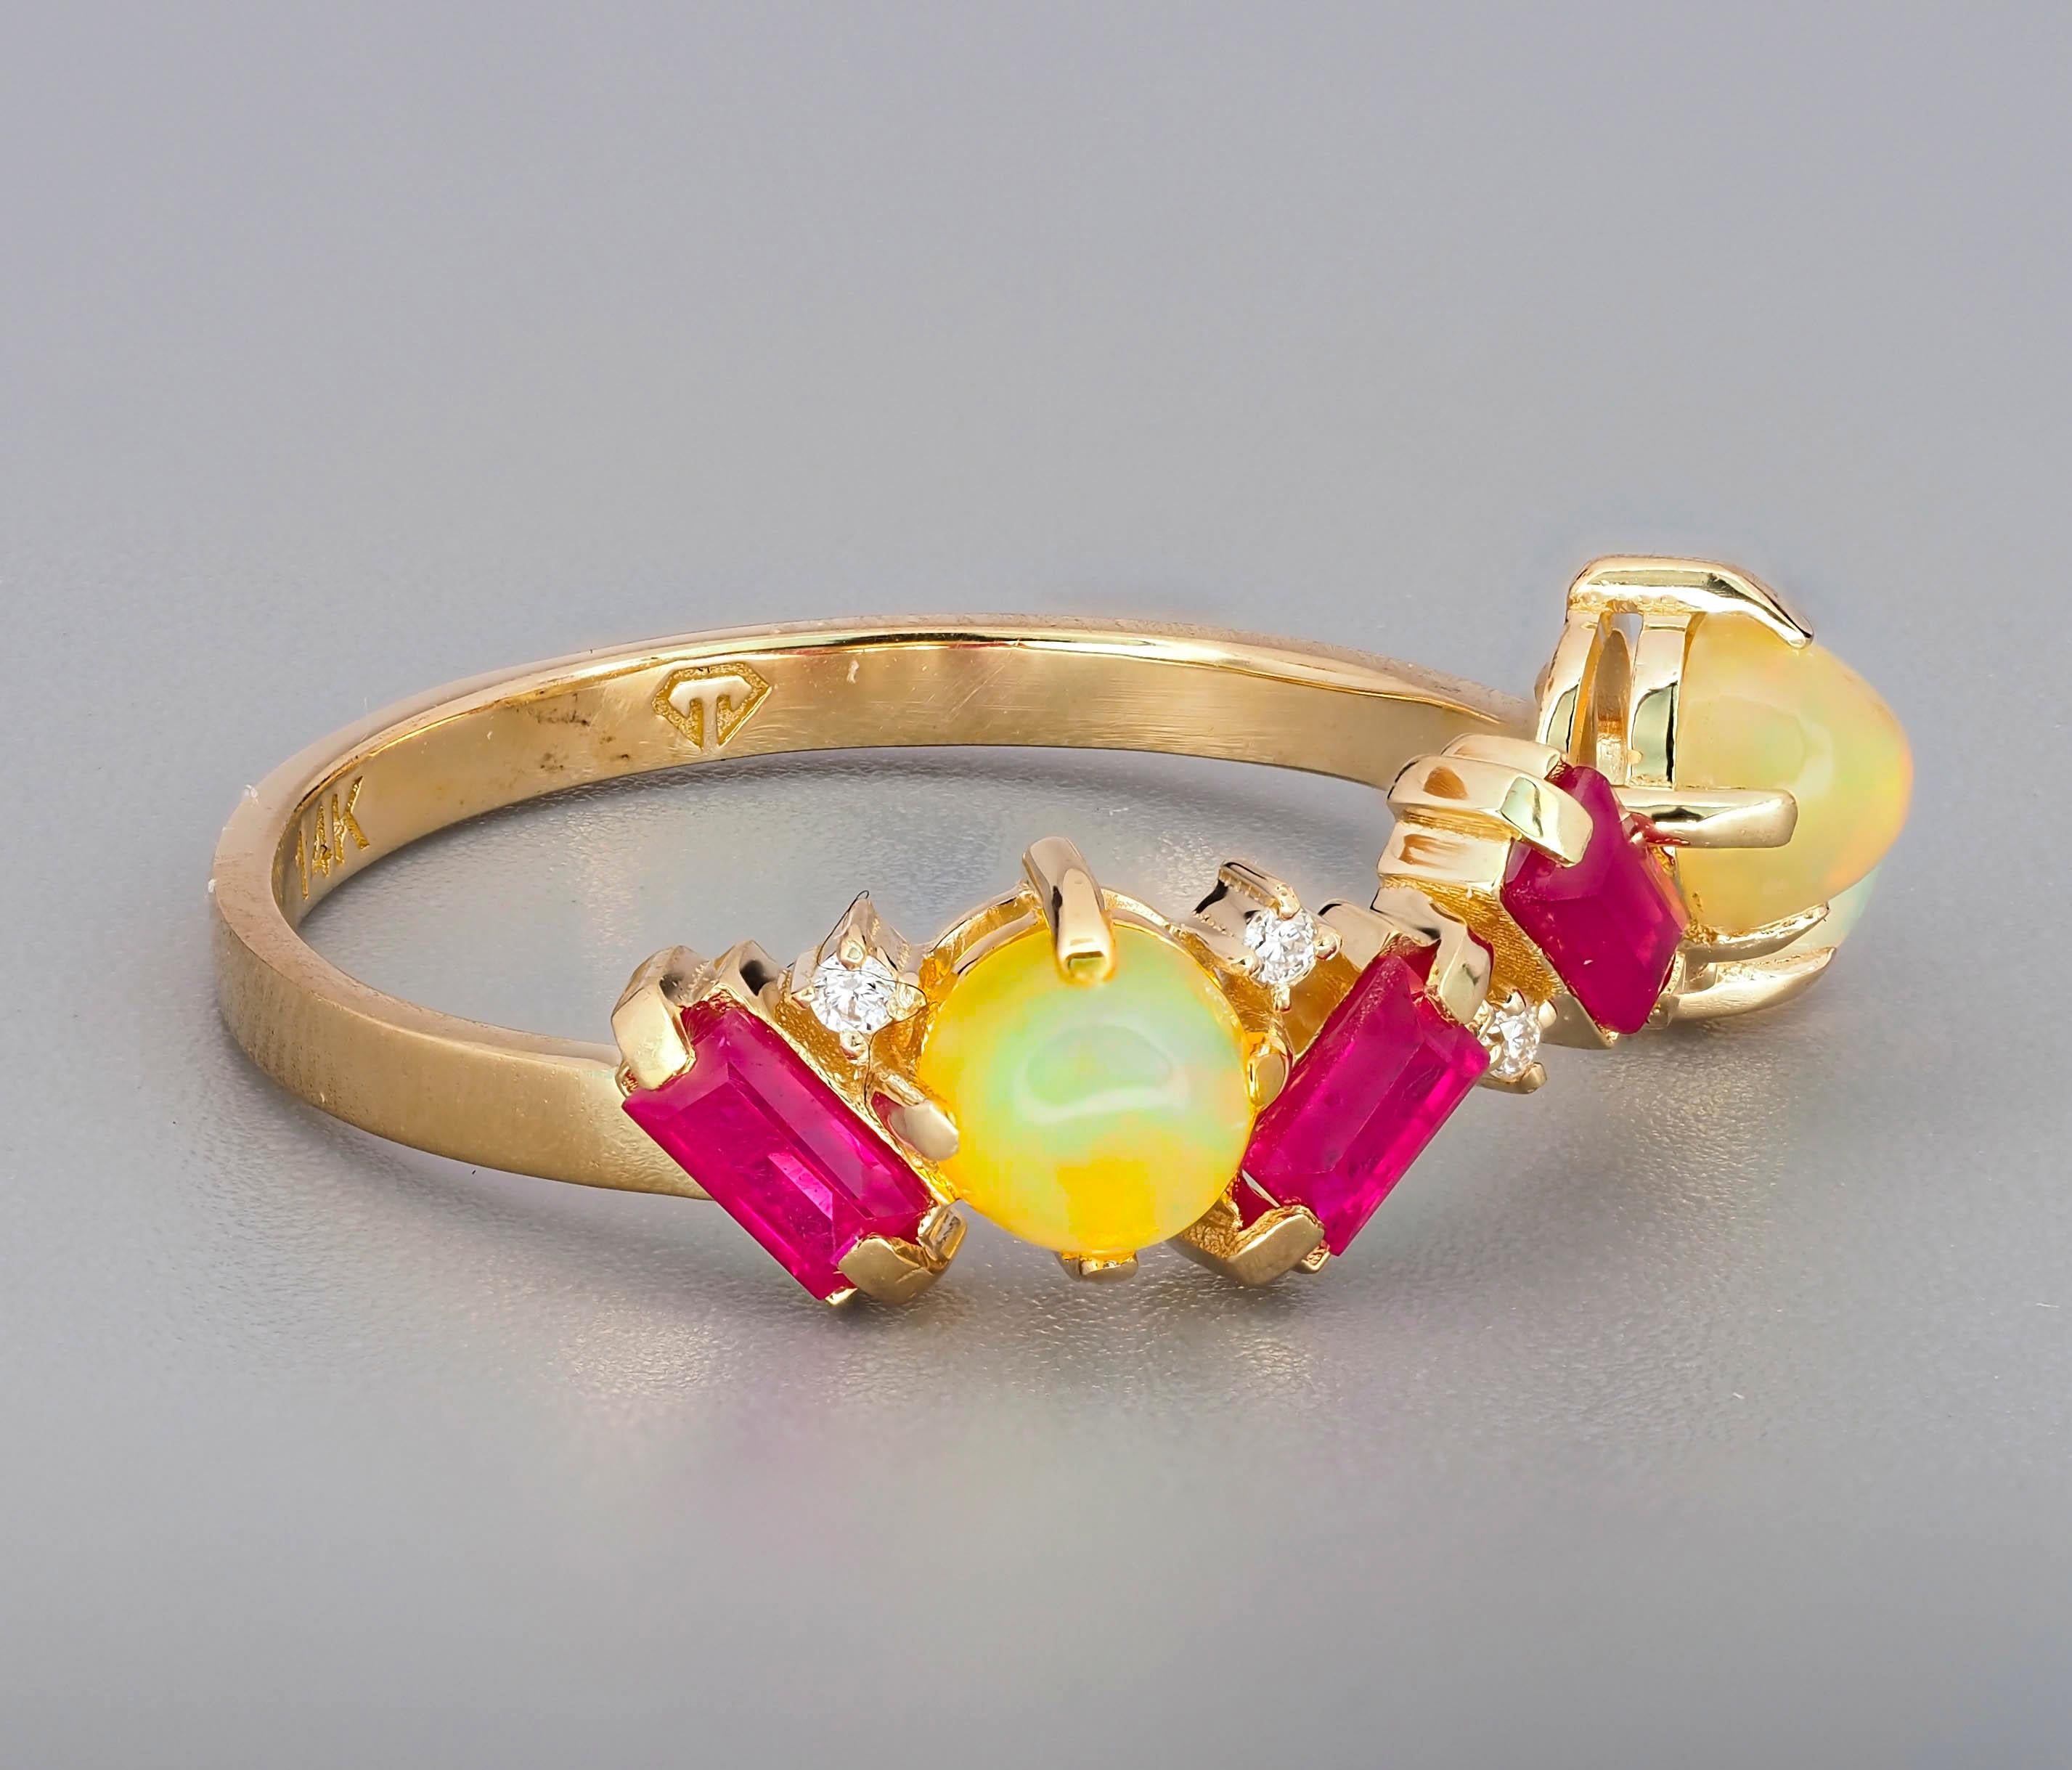 Natural rubies, opals and diamonds ring.

Weight: 1.75 g. depends from size
Metal - 14k gold

Central stone: rubies 3 pieces
Cut: baguettes
Weight: aprx 0.45 ct.
Color: red
Clarity: Transparent with inclusions

Set with opals - 3 piecs - Cut: round